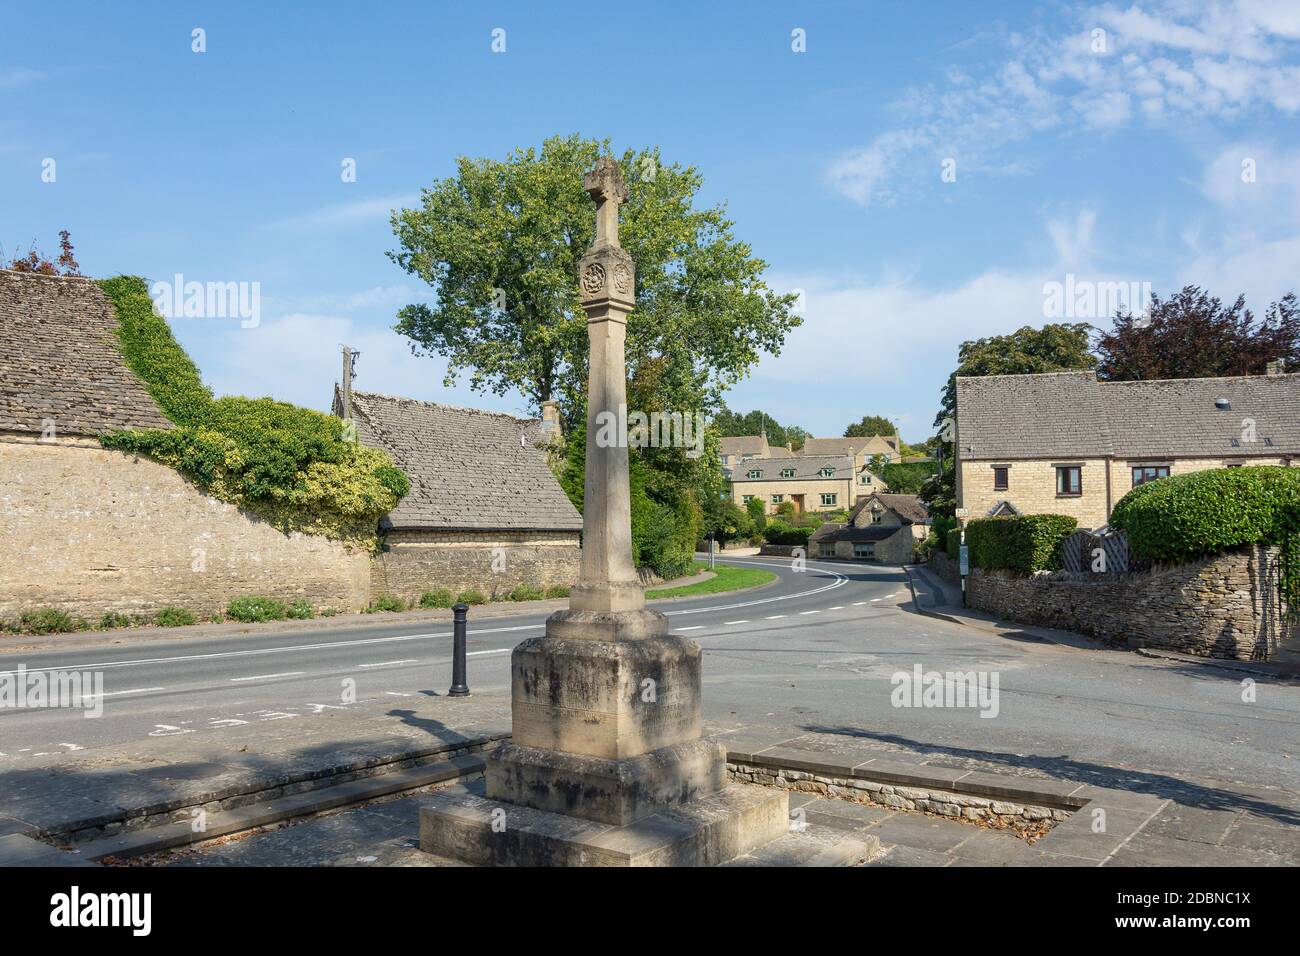 War Memorial, Meadow Lane, Fulbrook, Oxfordshire, Angleterre, Royaume-Uni Banque D'Images